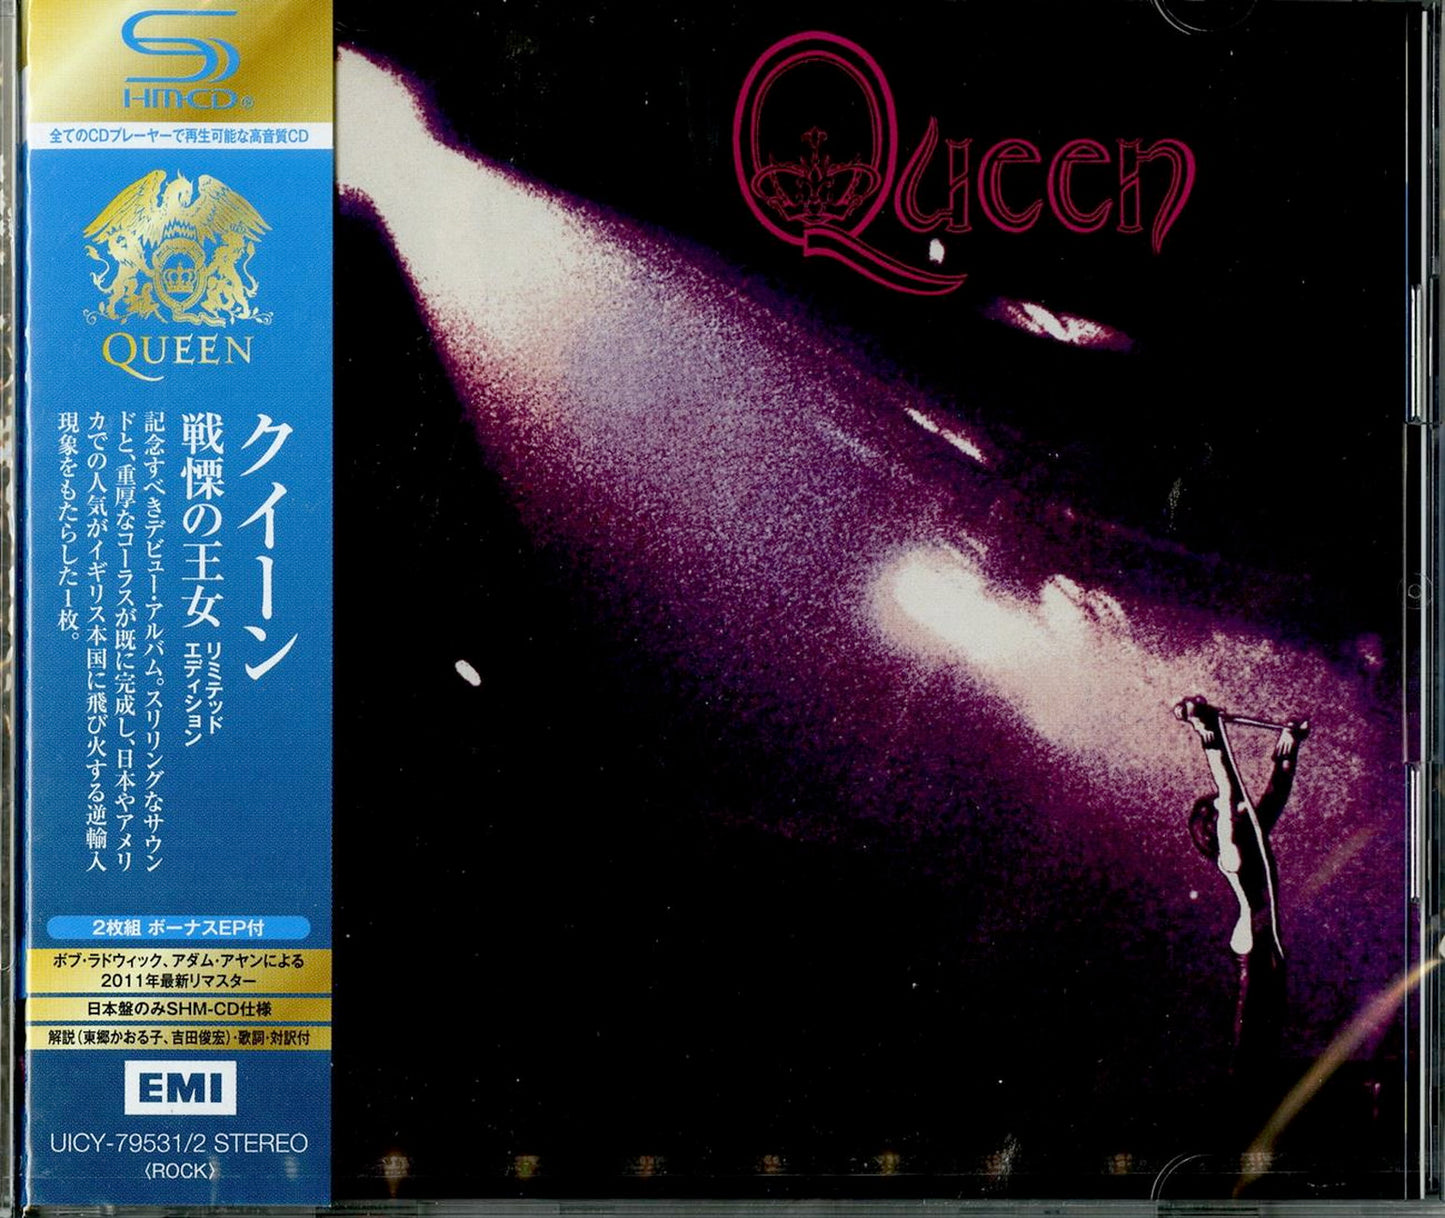 Queen - S/T - Japan  2 SHM-CD Limited Edition